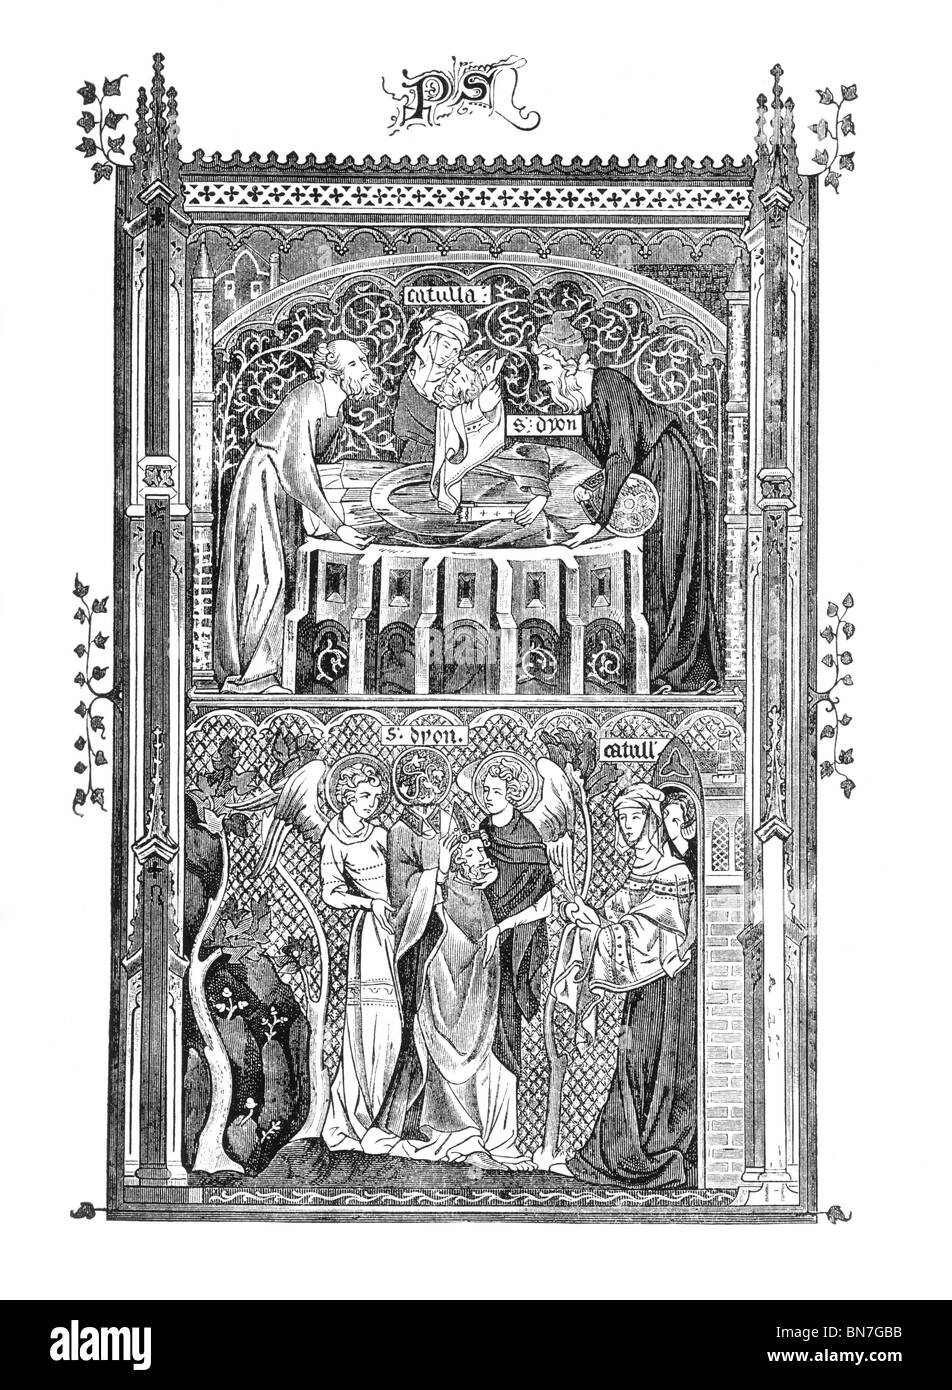 Black and White Illustration of the Martyrdom of St Denys Stock Photo